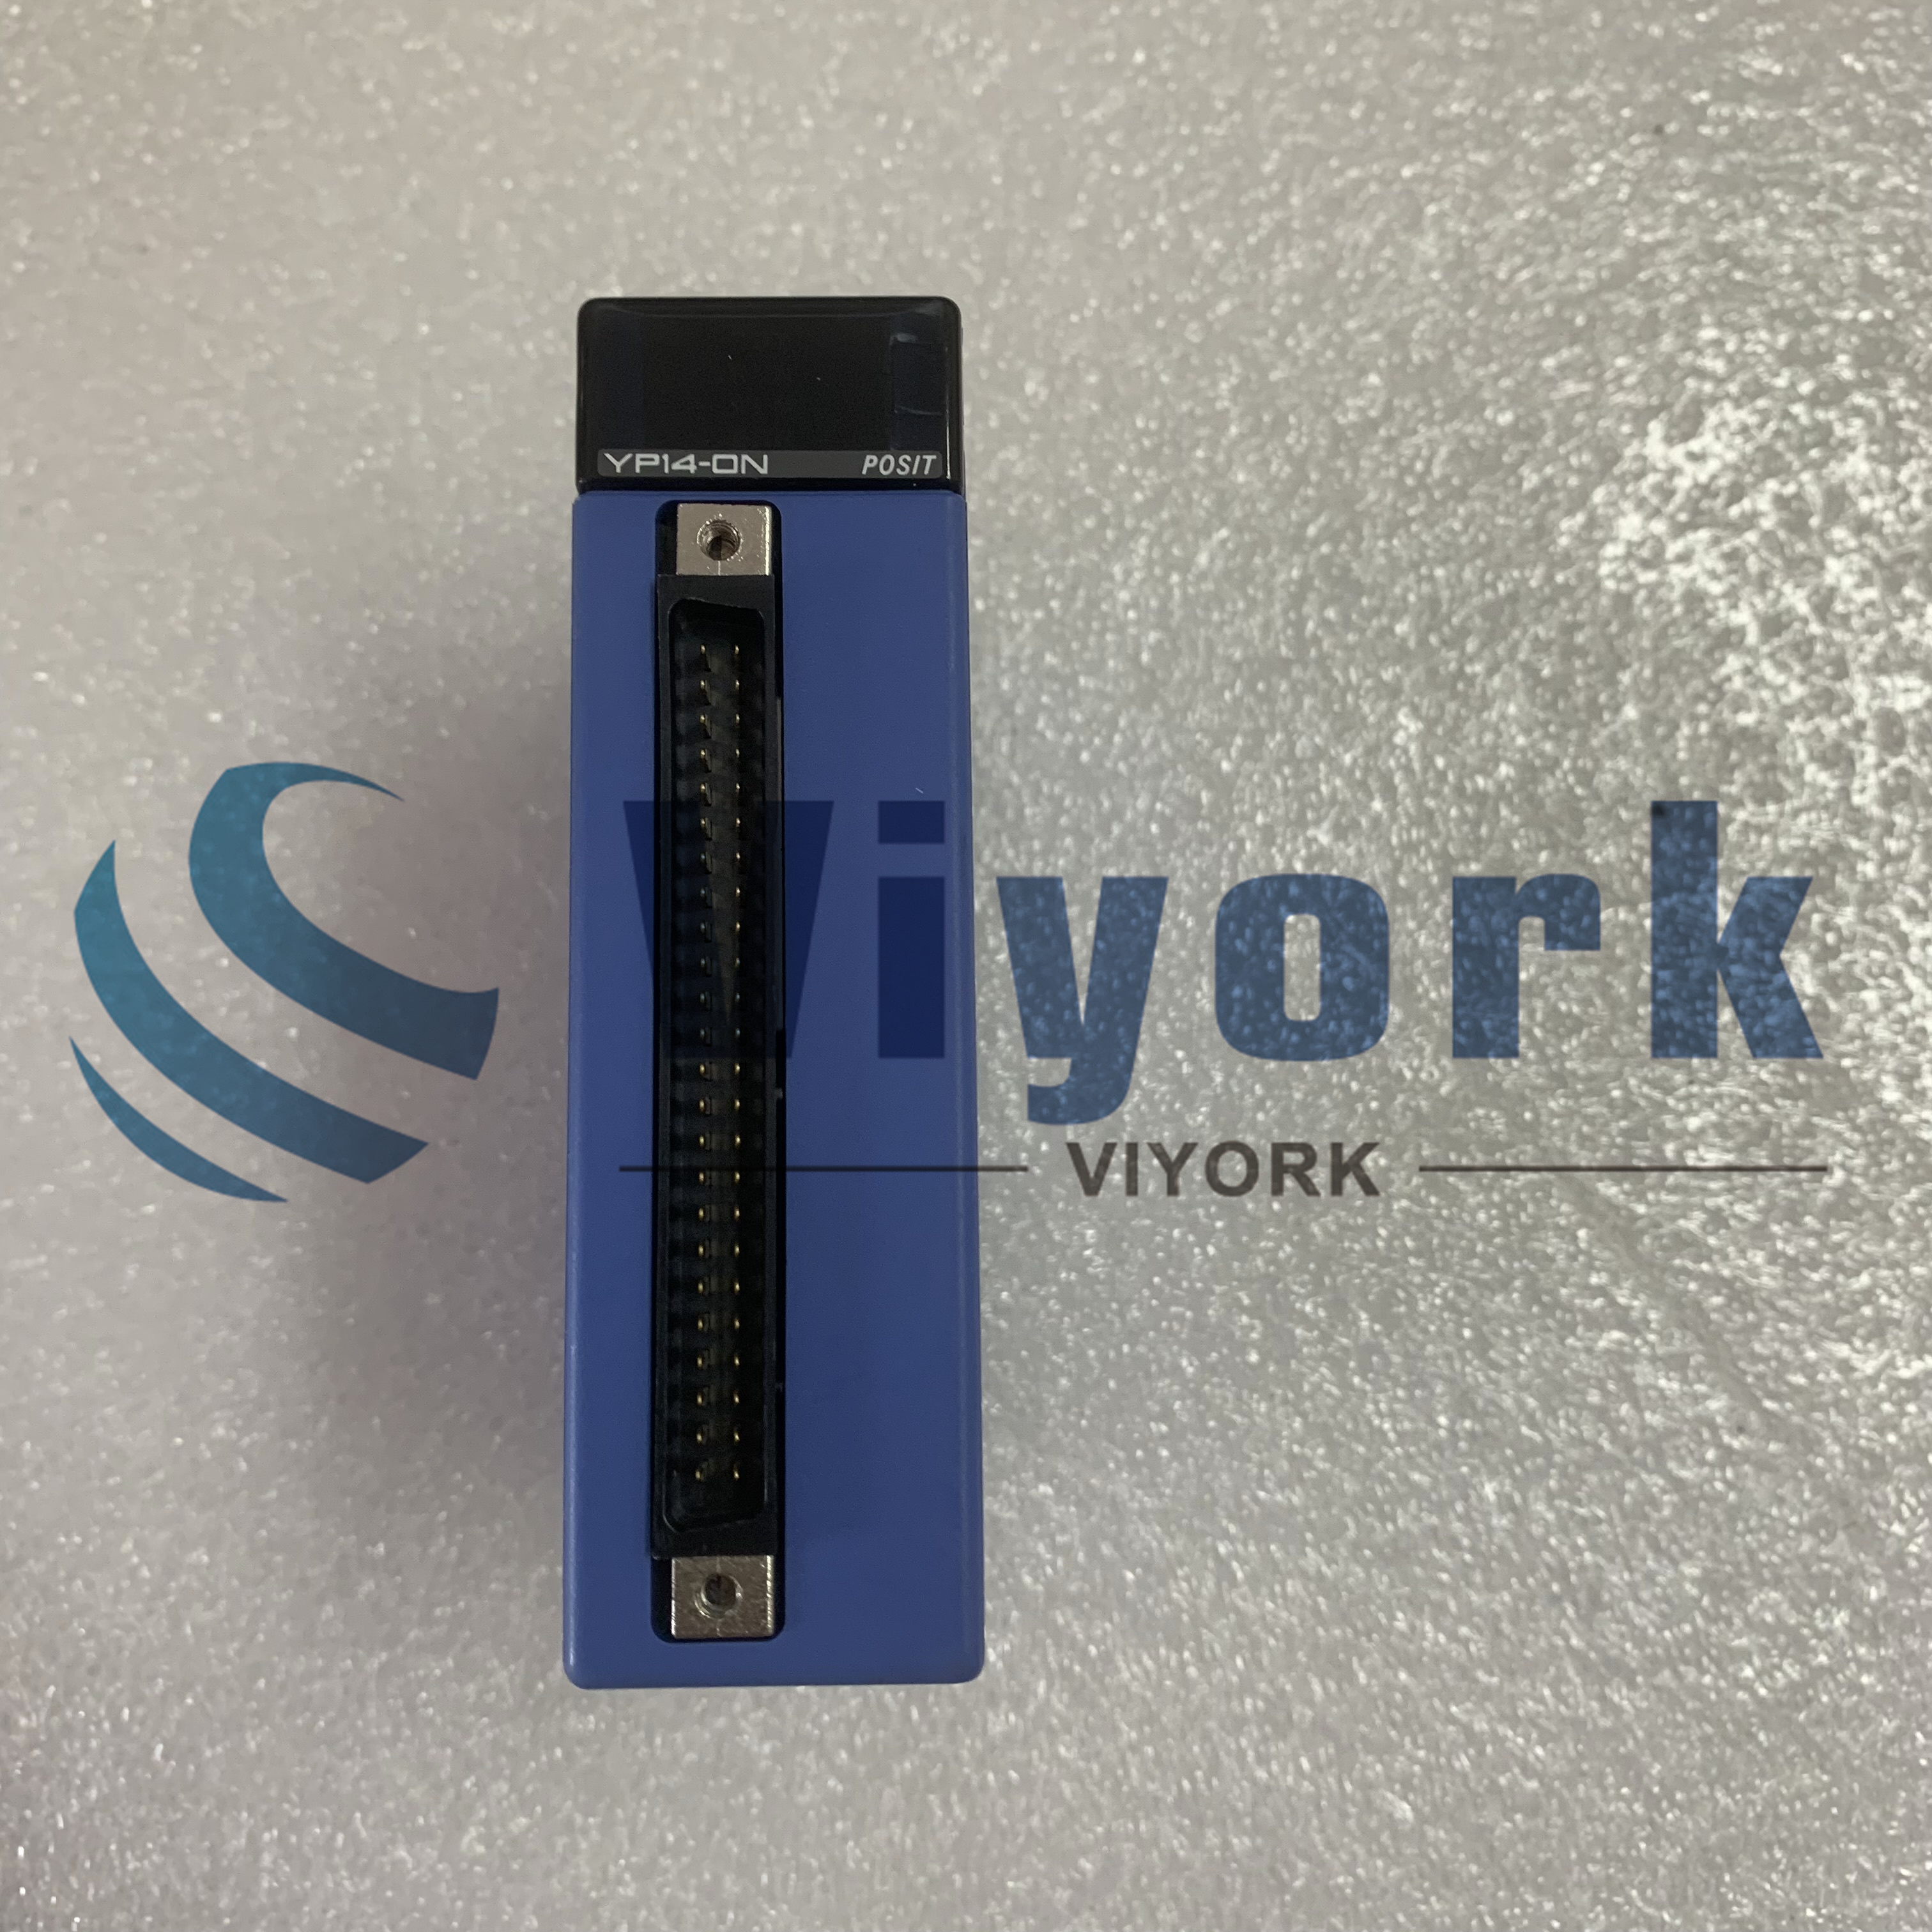 Yokogawa F3YP14-0N POSITIONING MODULE WITH MULTI-CHANNEL PULSE OUT